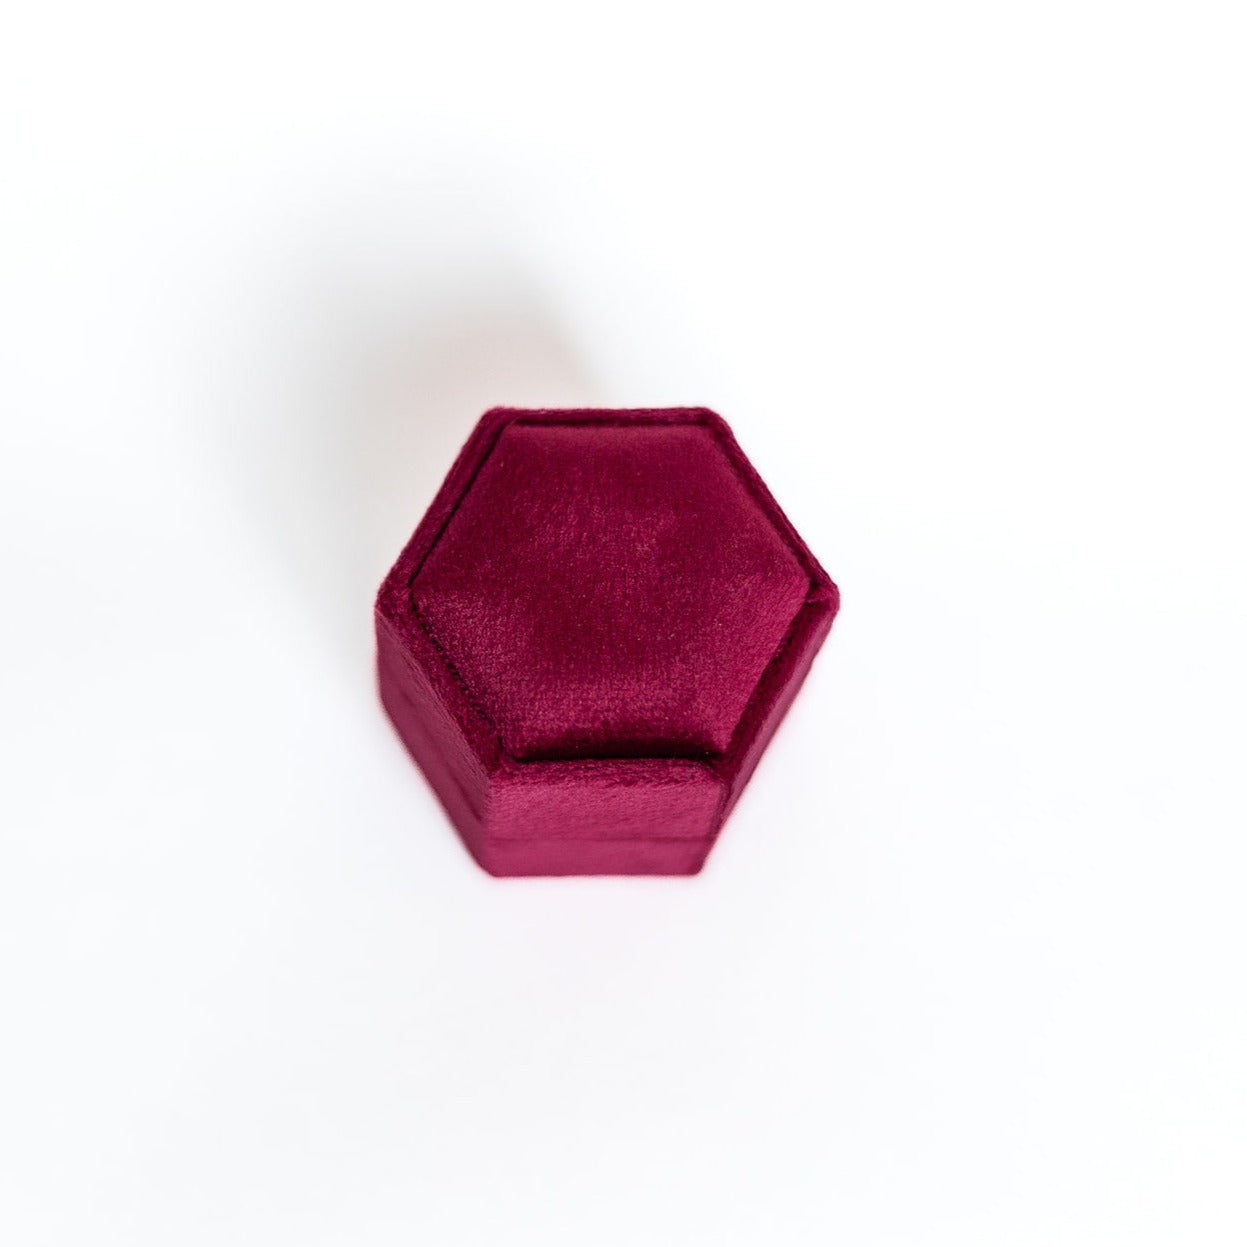 The outside of a raspberry hexagon ring box.